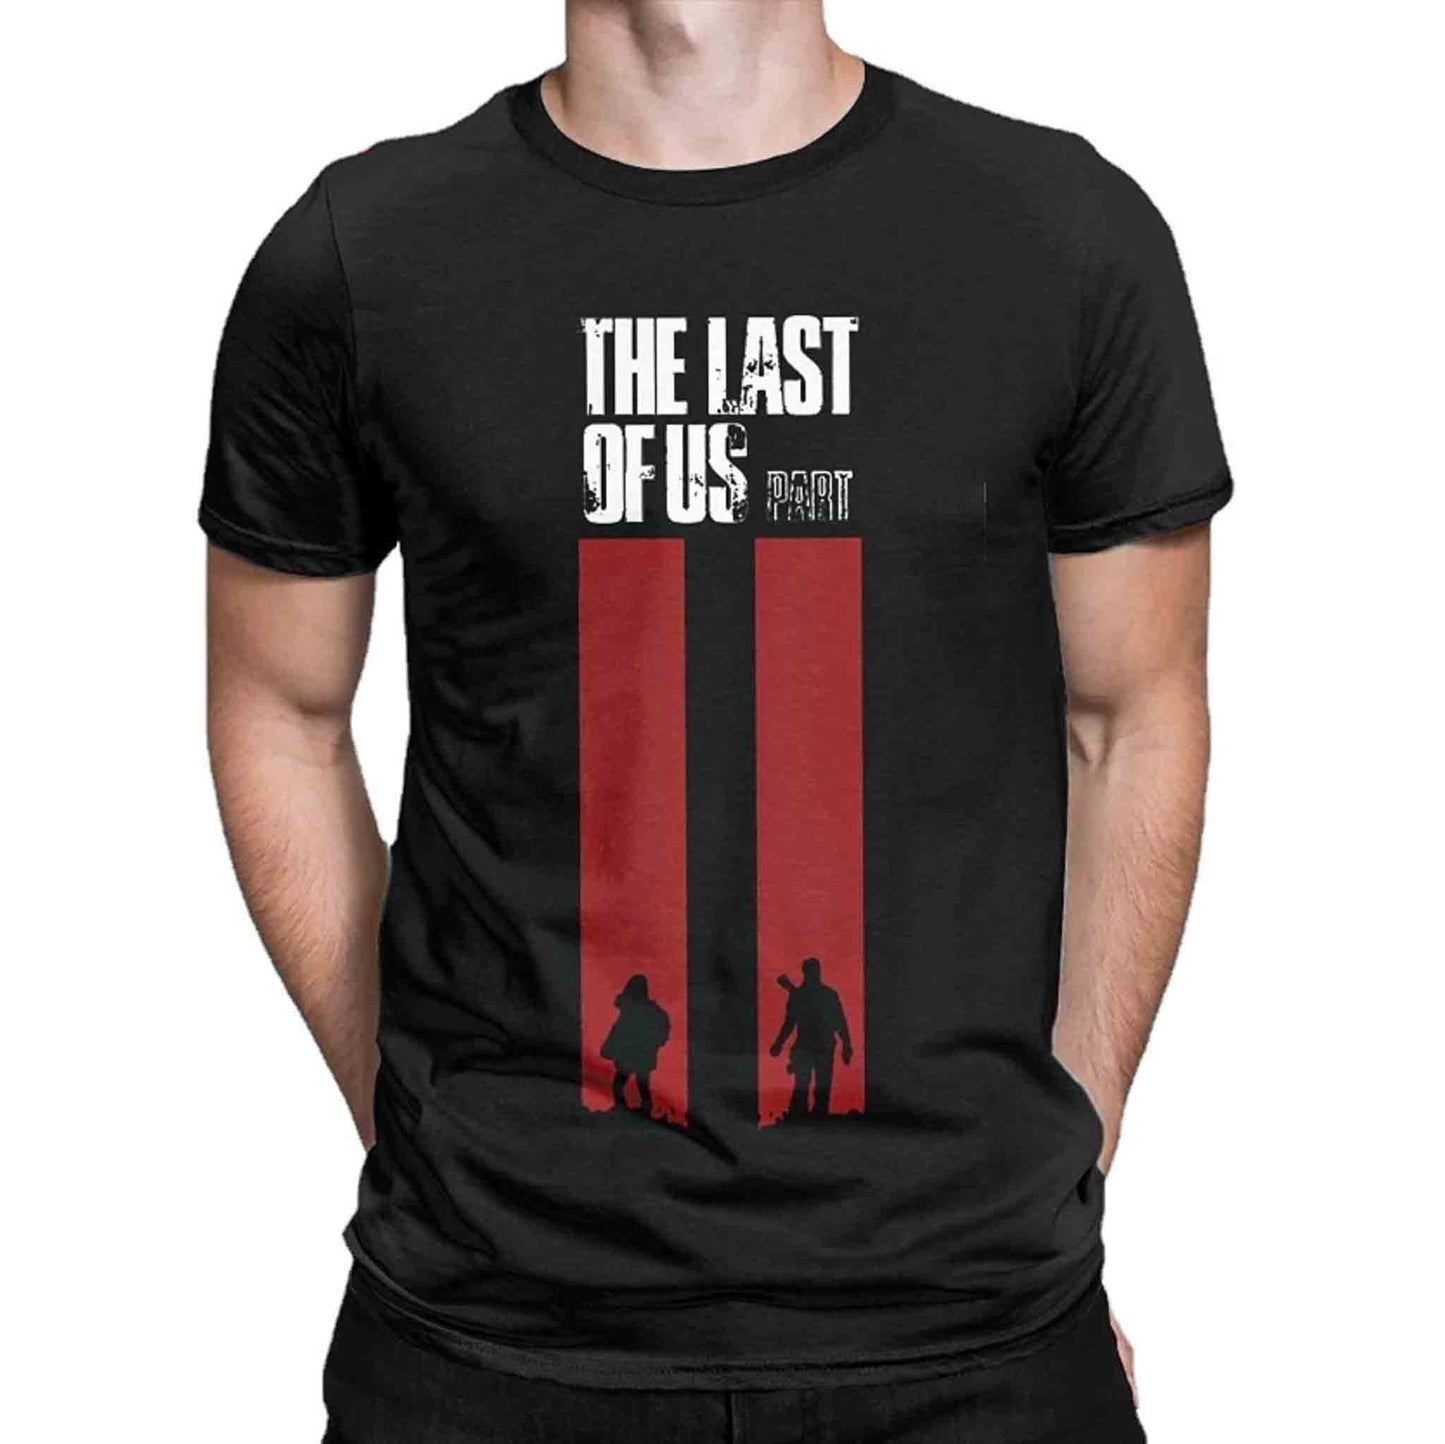 The Last of Us Look For The Light Tshirt - Available at 2Fast2See.co